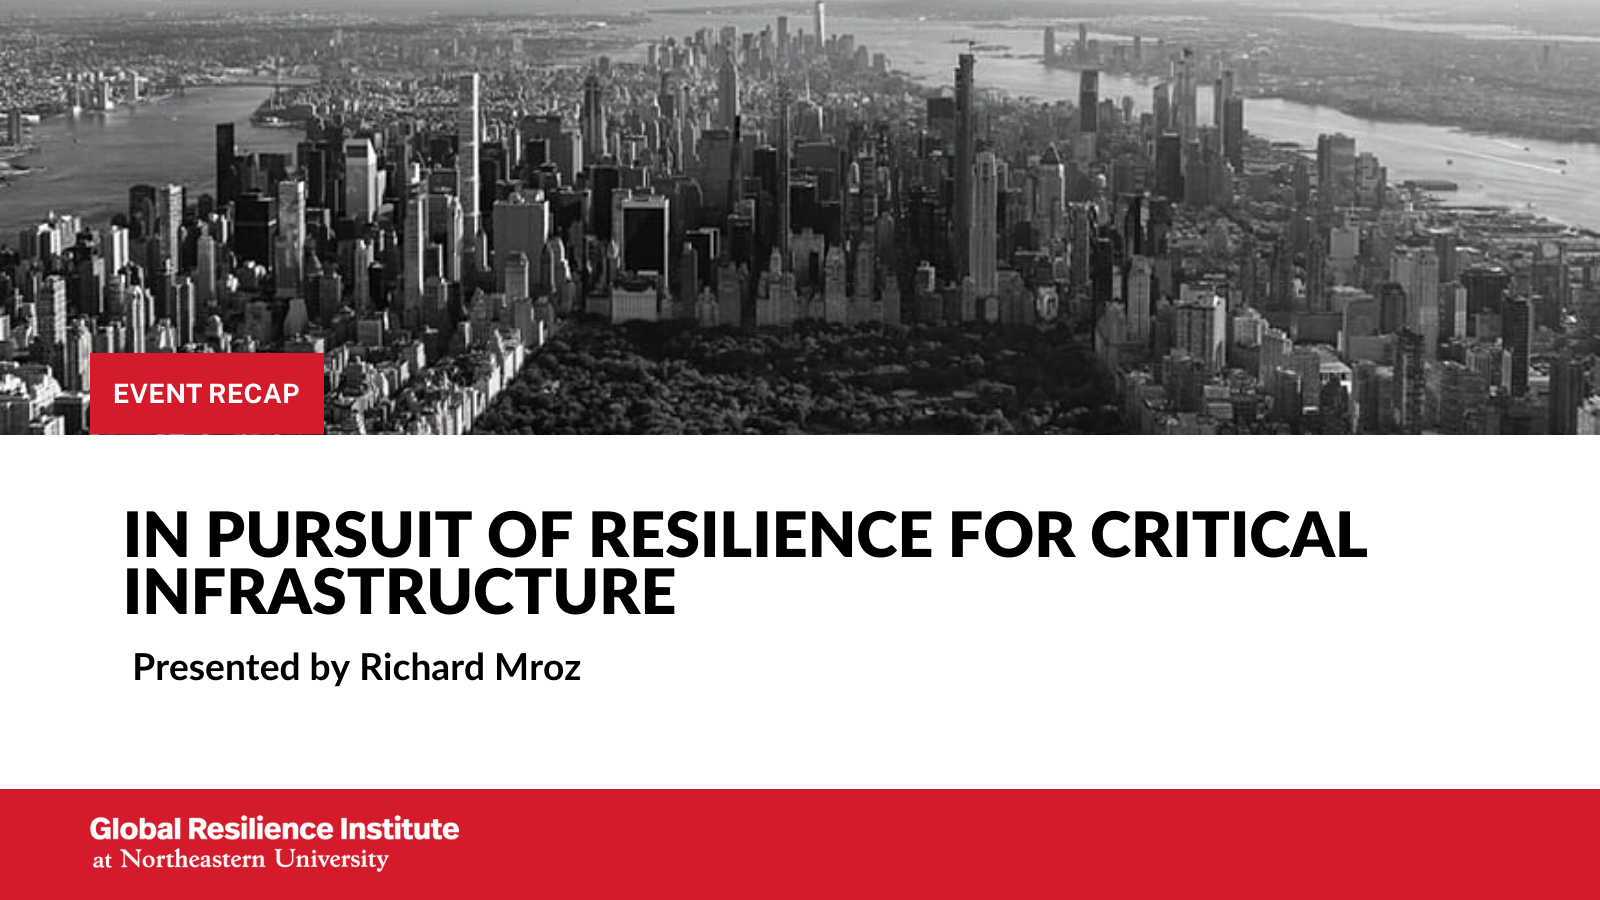 Event Recap: In Pursuit of Critical Infrastructure presented by Richard Mroz